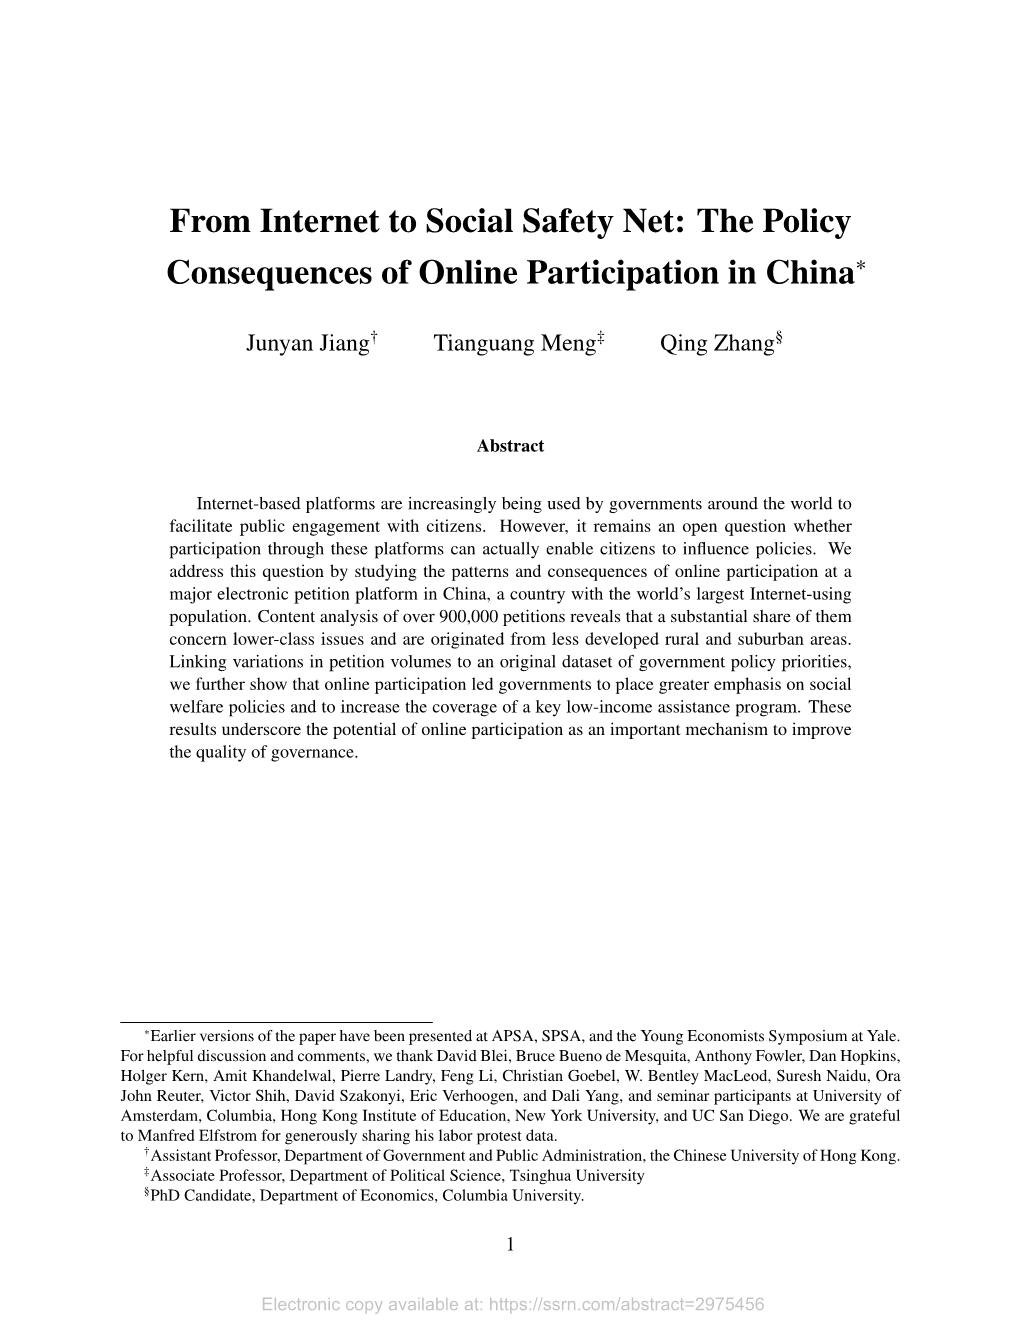 From Internet to Social Safety Net: the Policy Consequences of Online Participation in China∗